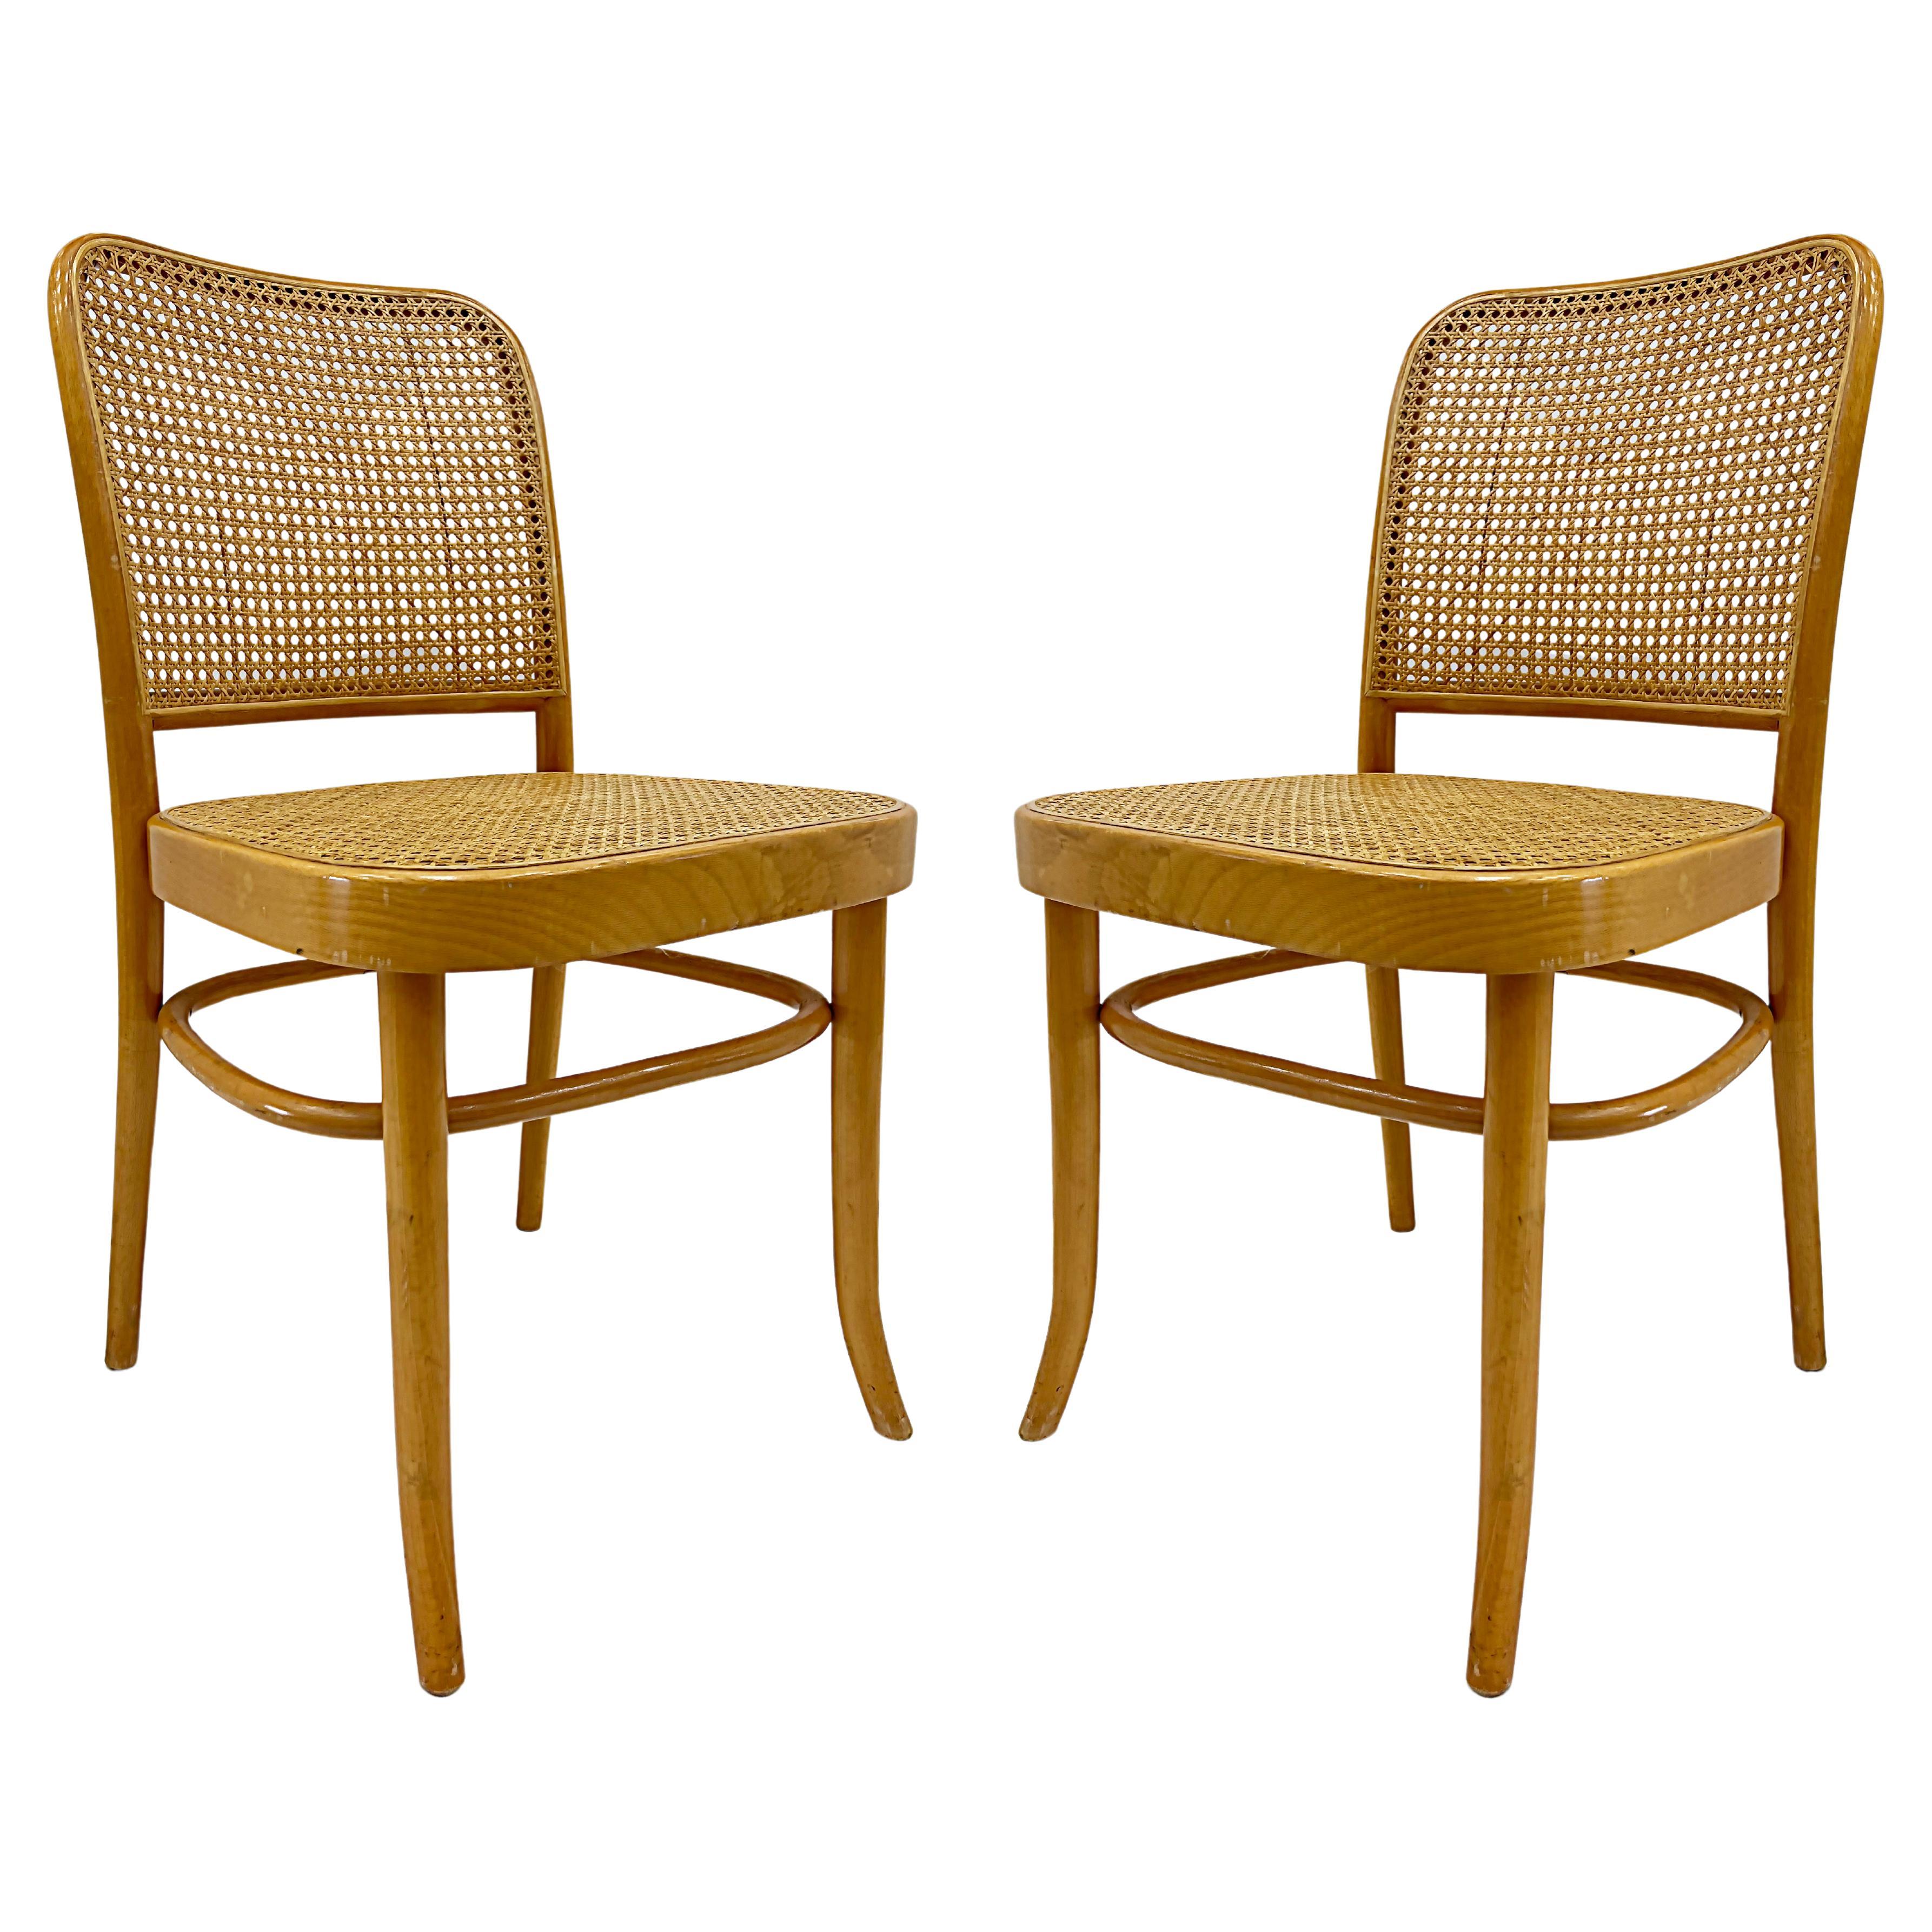 Salvatore Leone Vintage Bentwood Caned Chairs, Thonet Style